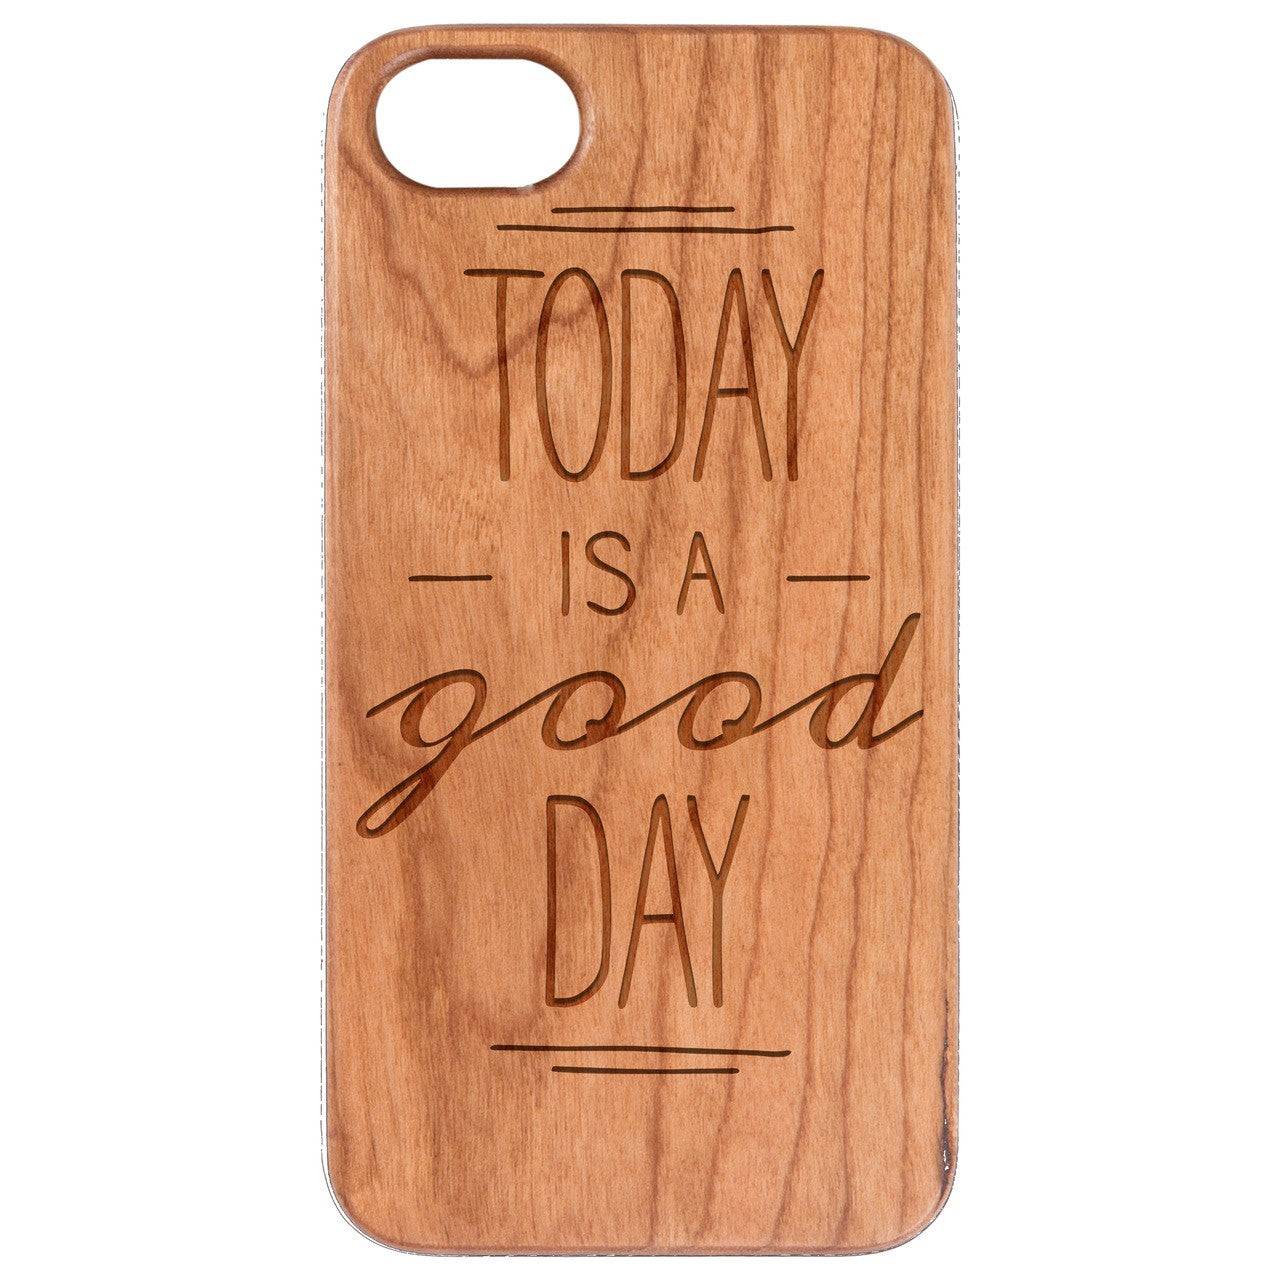  Today is a Good Day - Engraved - Wooden Phone Case - IPhone 13 Models